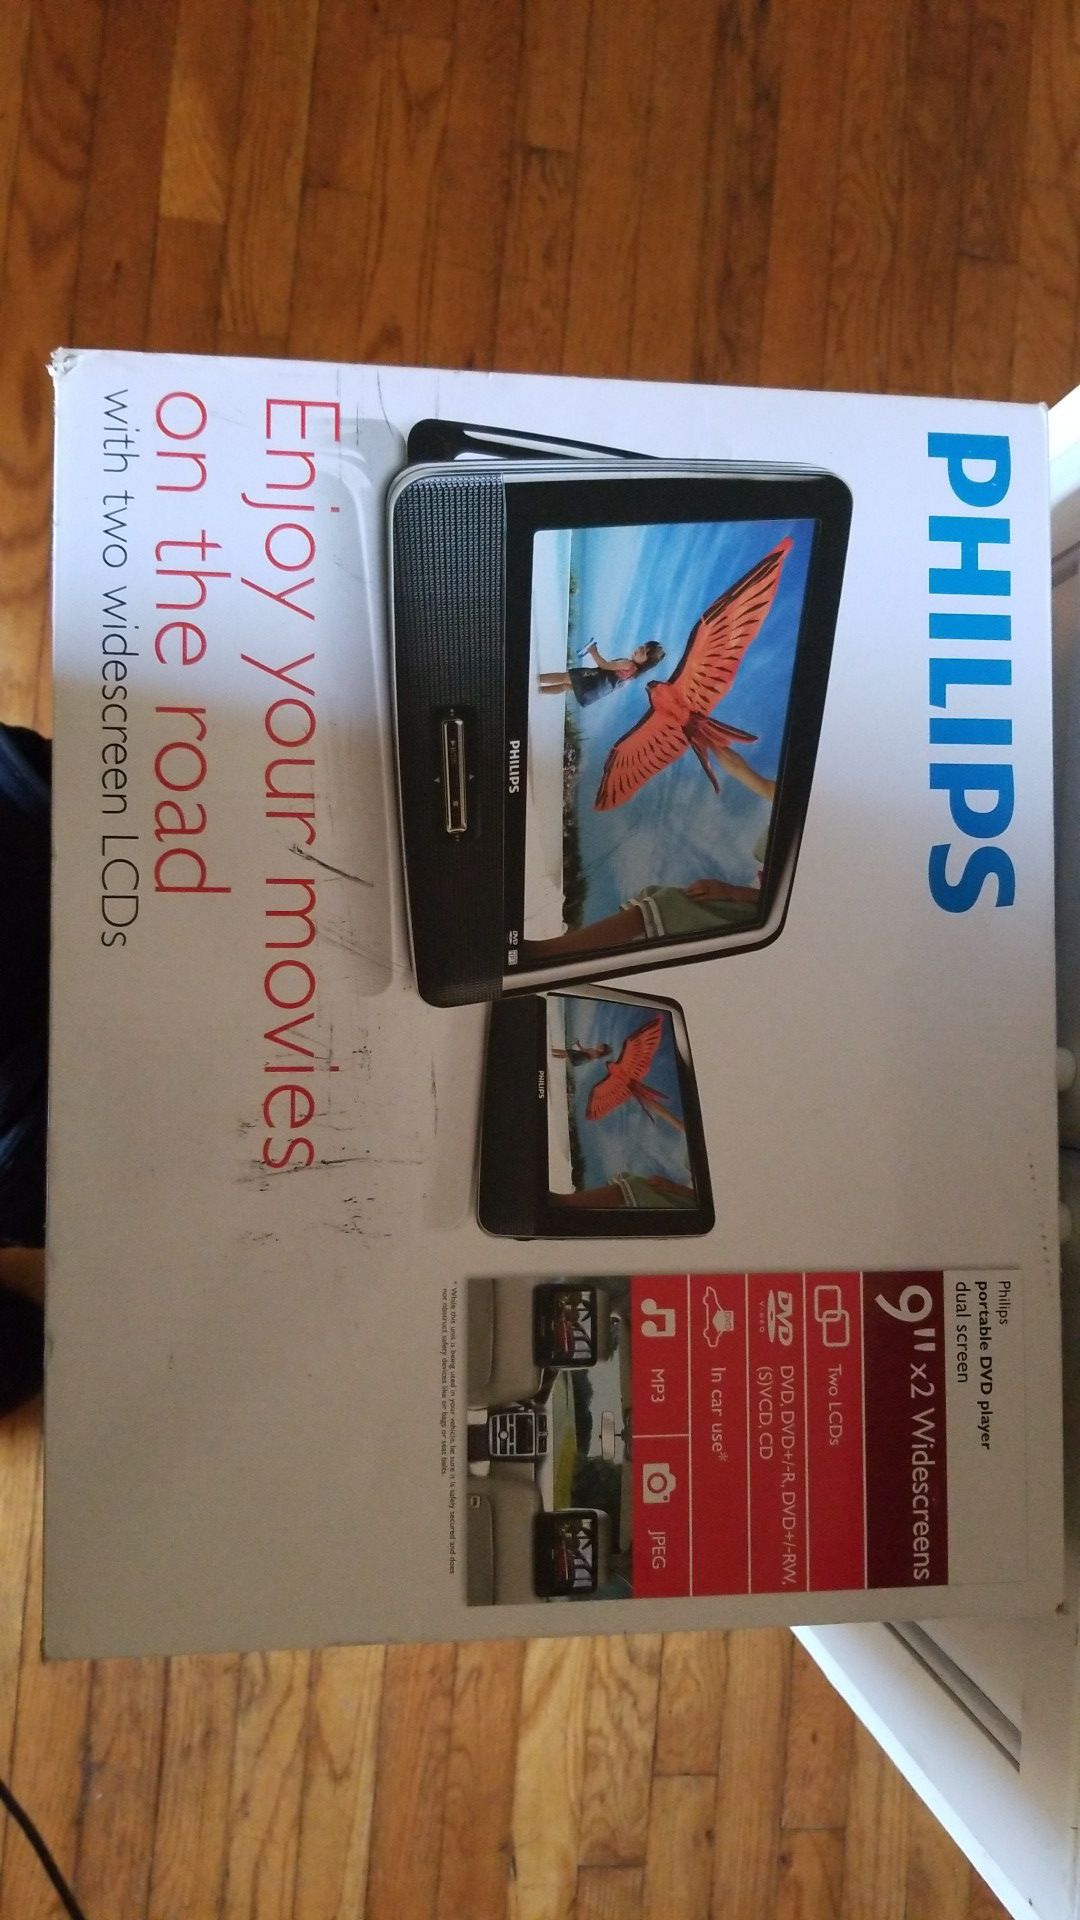 Phillips dual screen portable DVD player